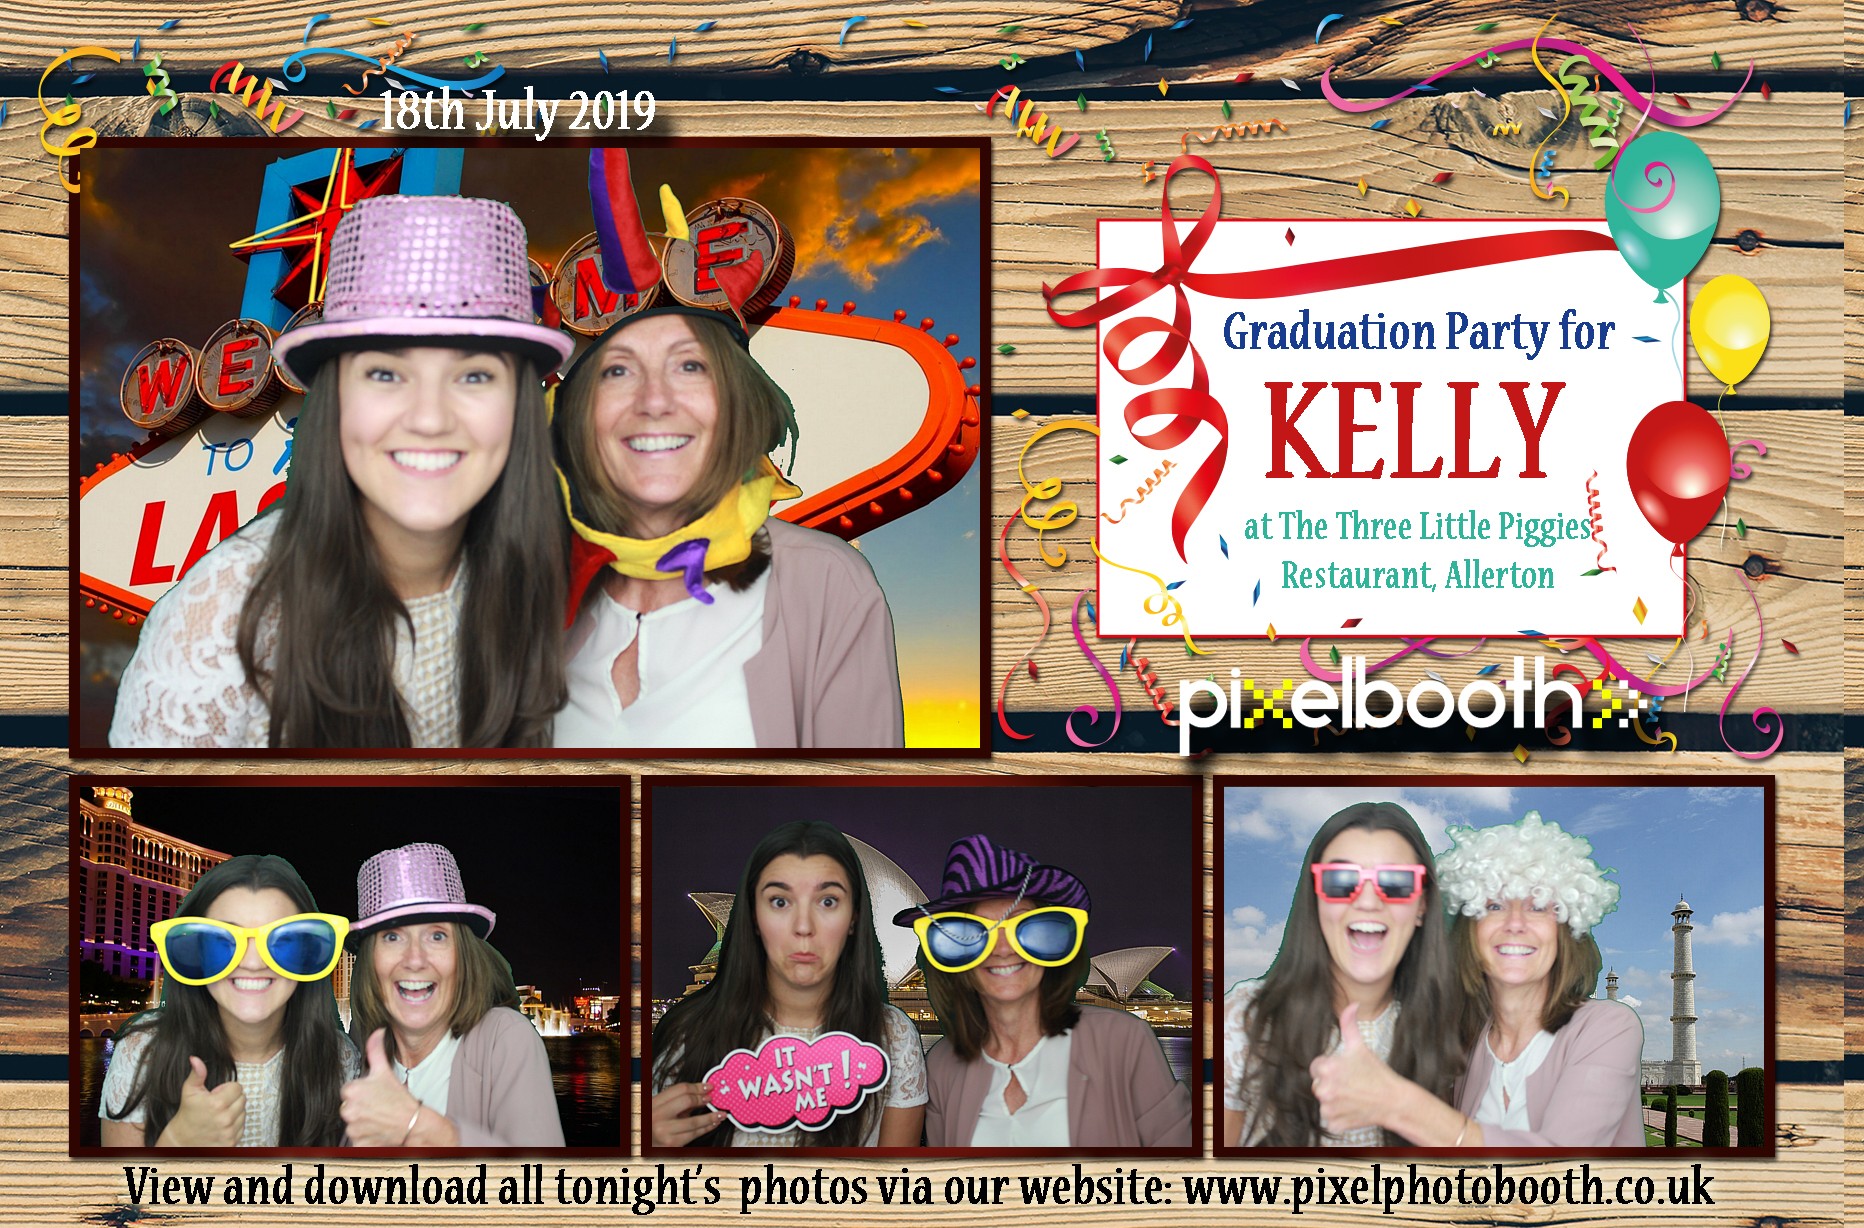 18th July 2019: Kelly's Graduation Party